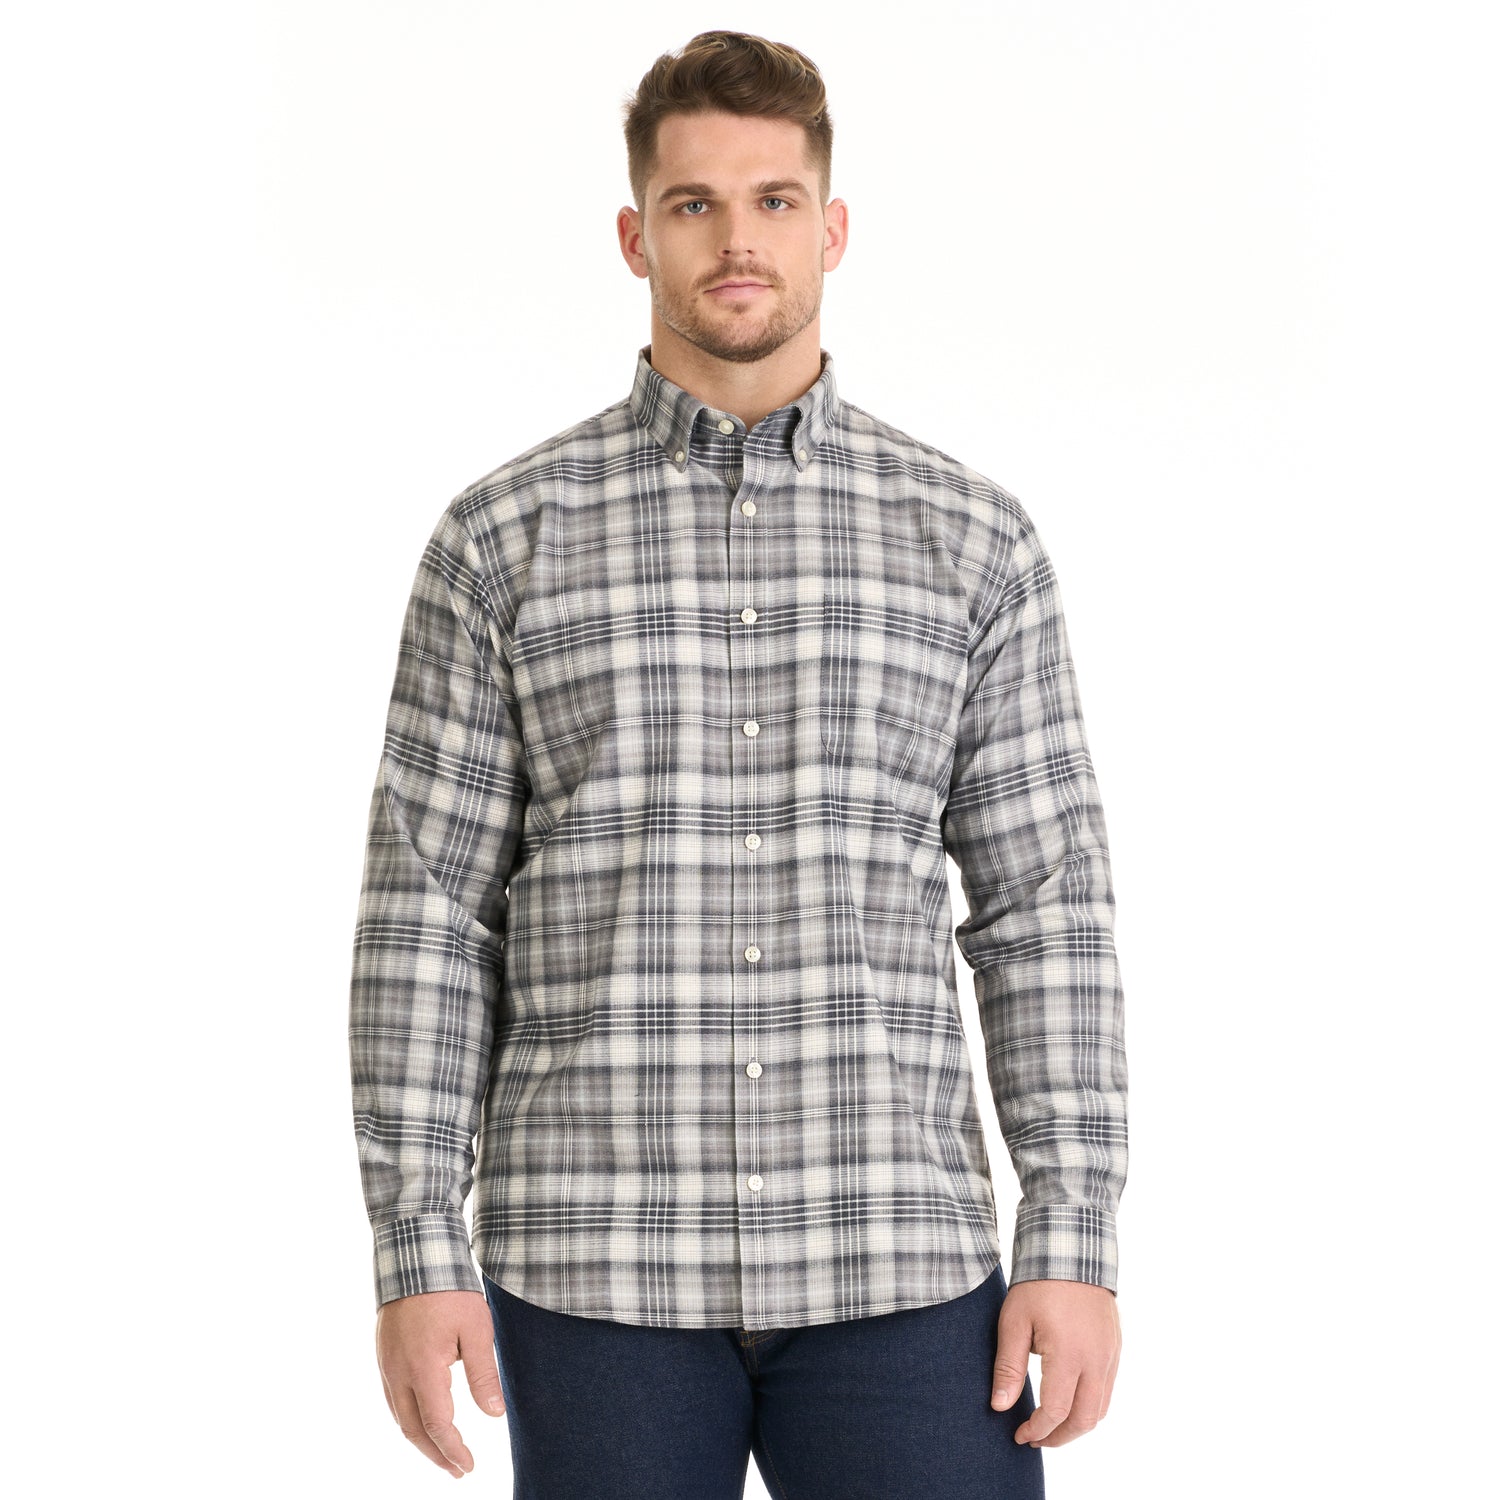 Weekend Twill Ombre Plaid Long Sleeve Button Up Top – Big and Tall